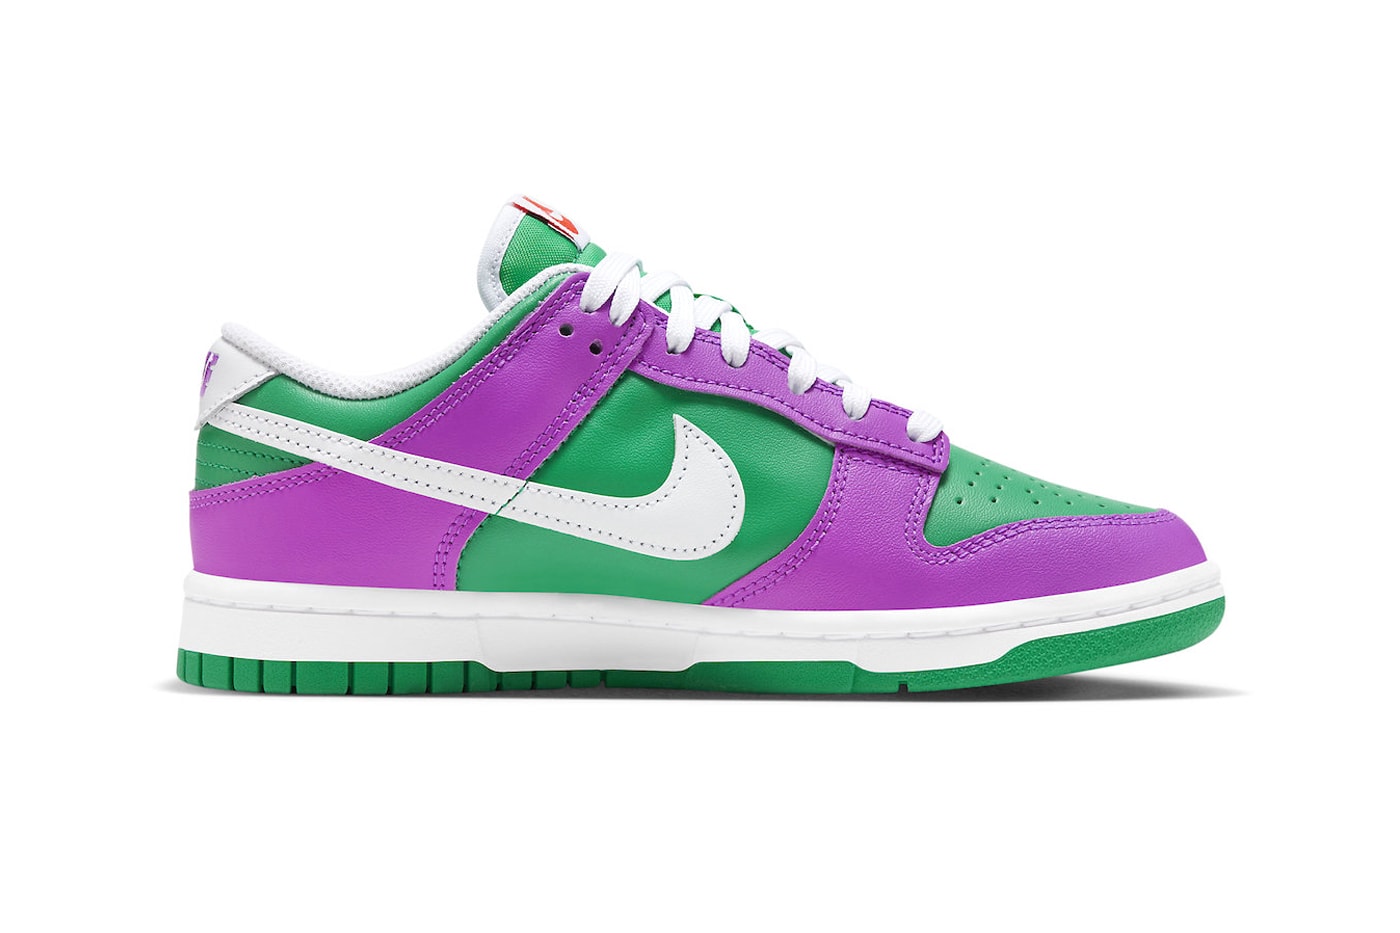  Nike Dunk Low Appears in Vibrant Stadium Green and Fuchsia Colorway FD9924-311 release info joker colors barney 